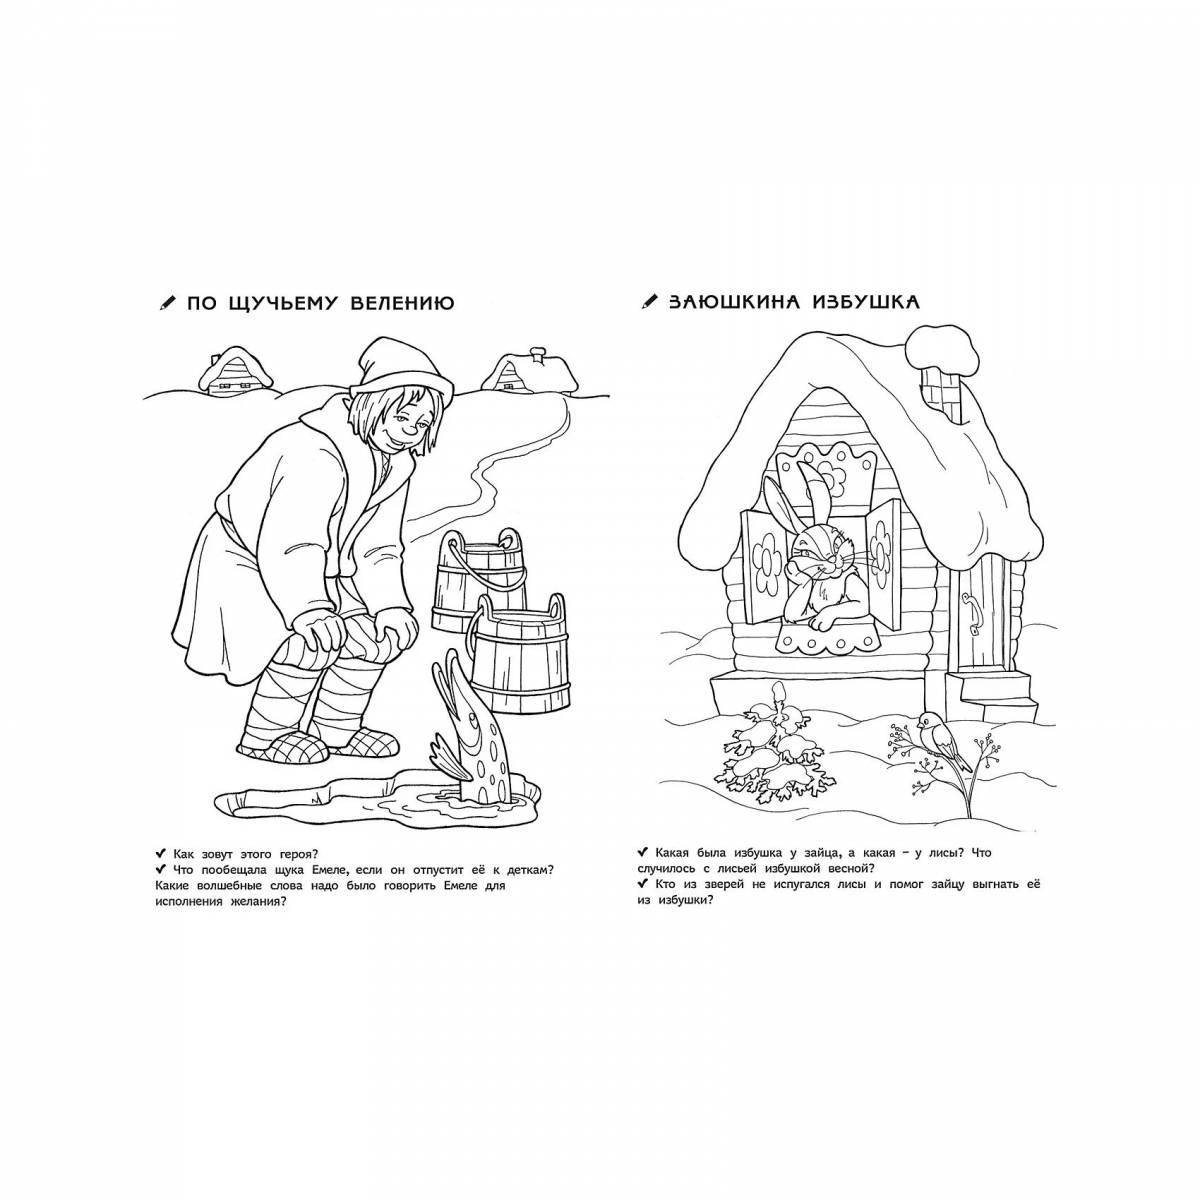 Magic coloring book based on Russian folk tales for preschoolers